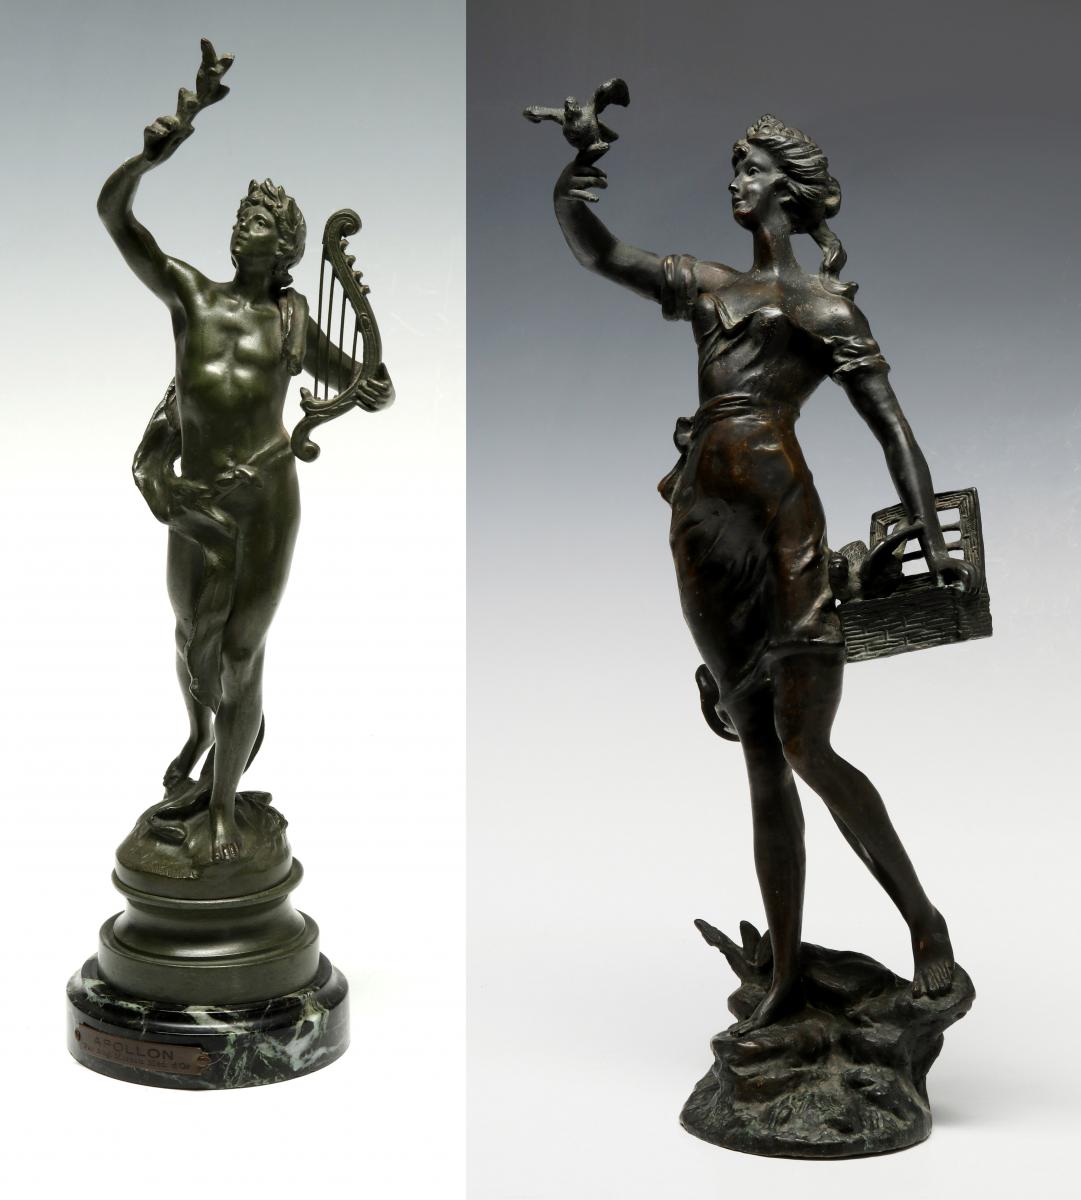 TWO EARLY 20TH CENTURY FRENCH BRONZE SCULPTURES